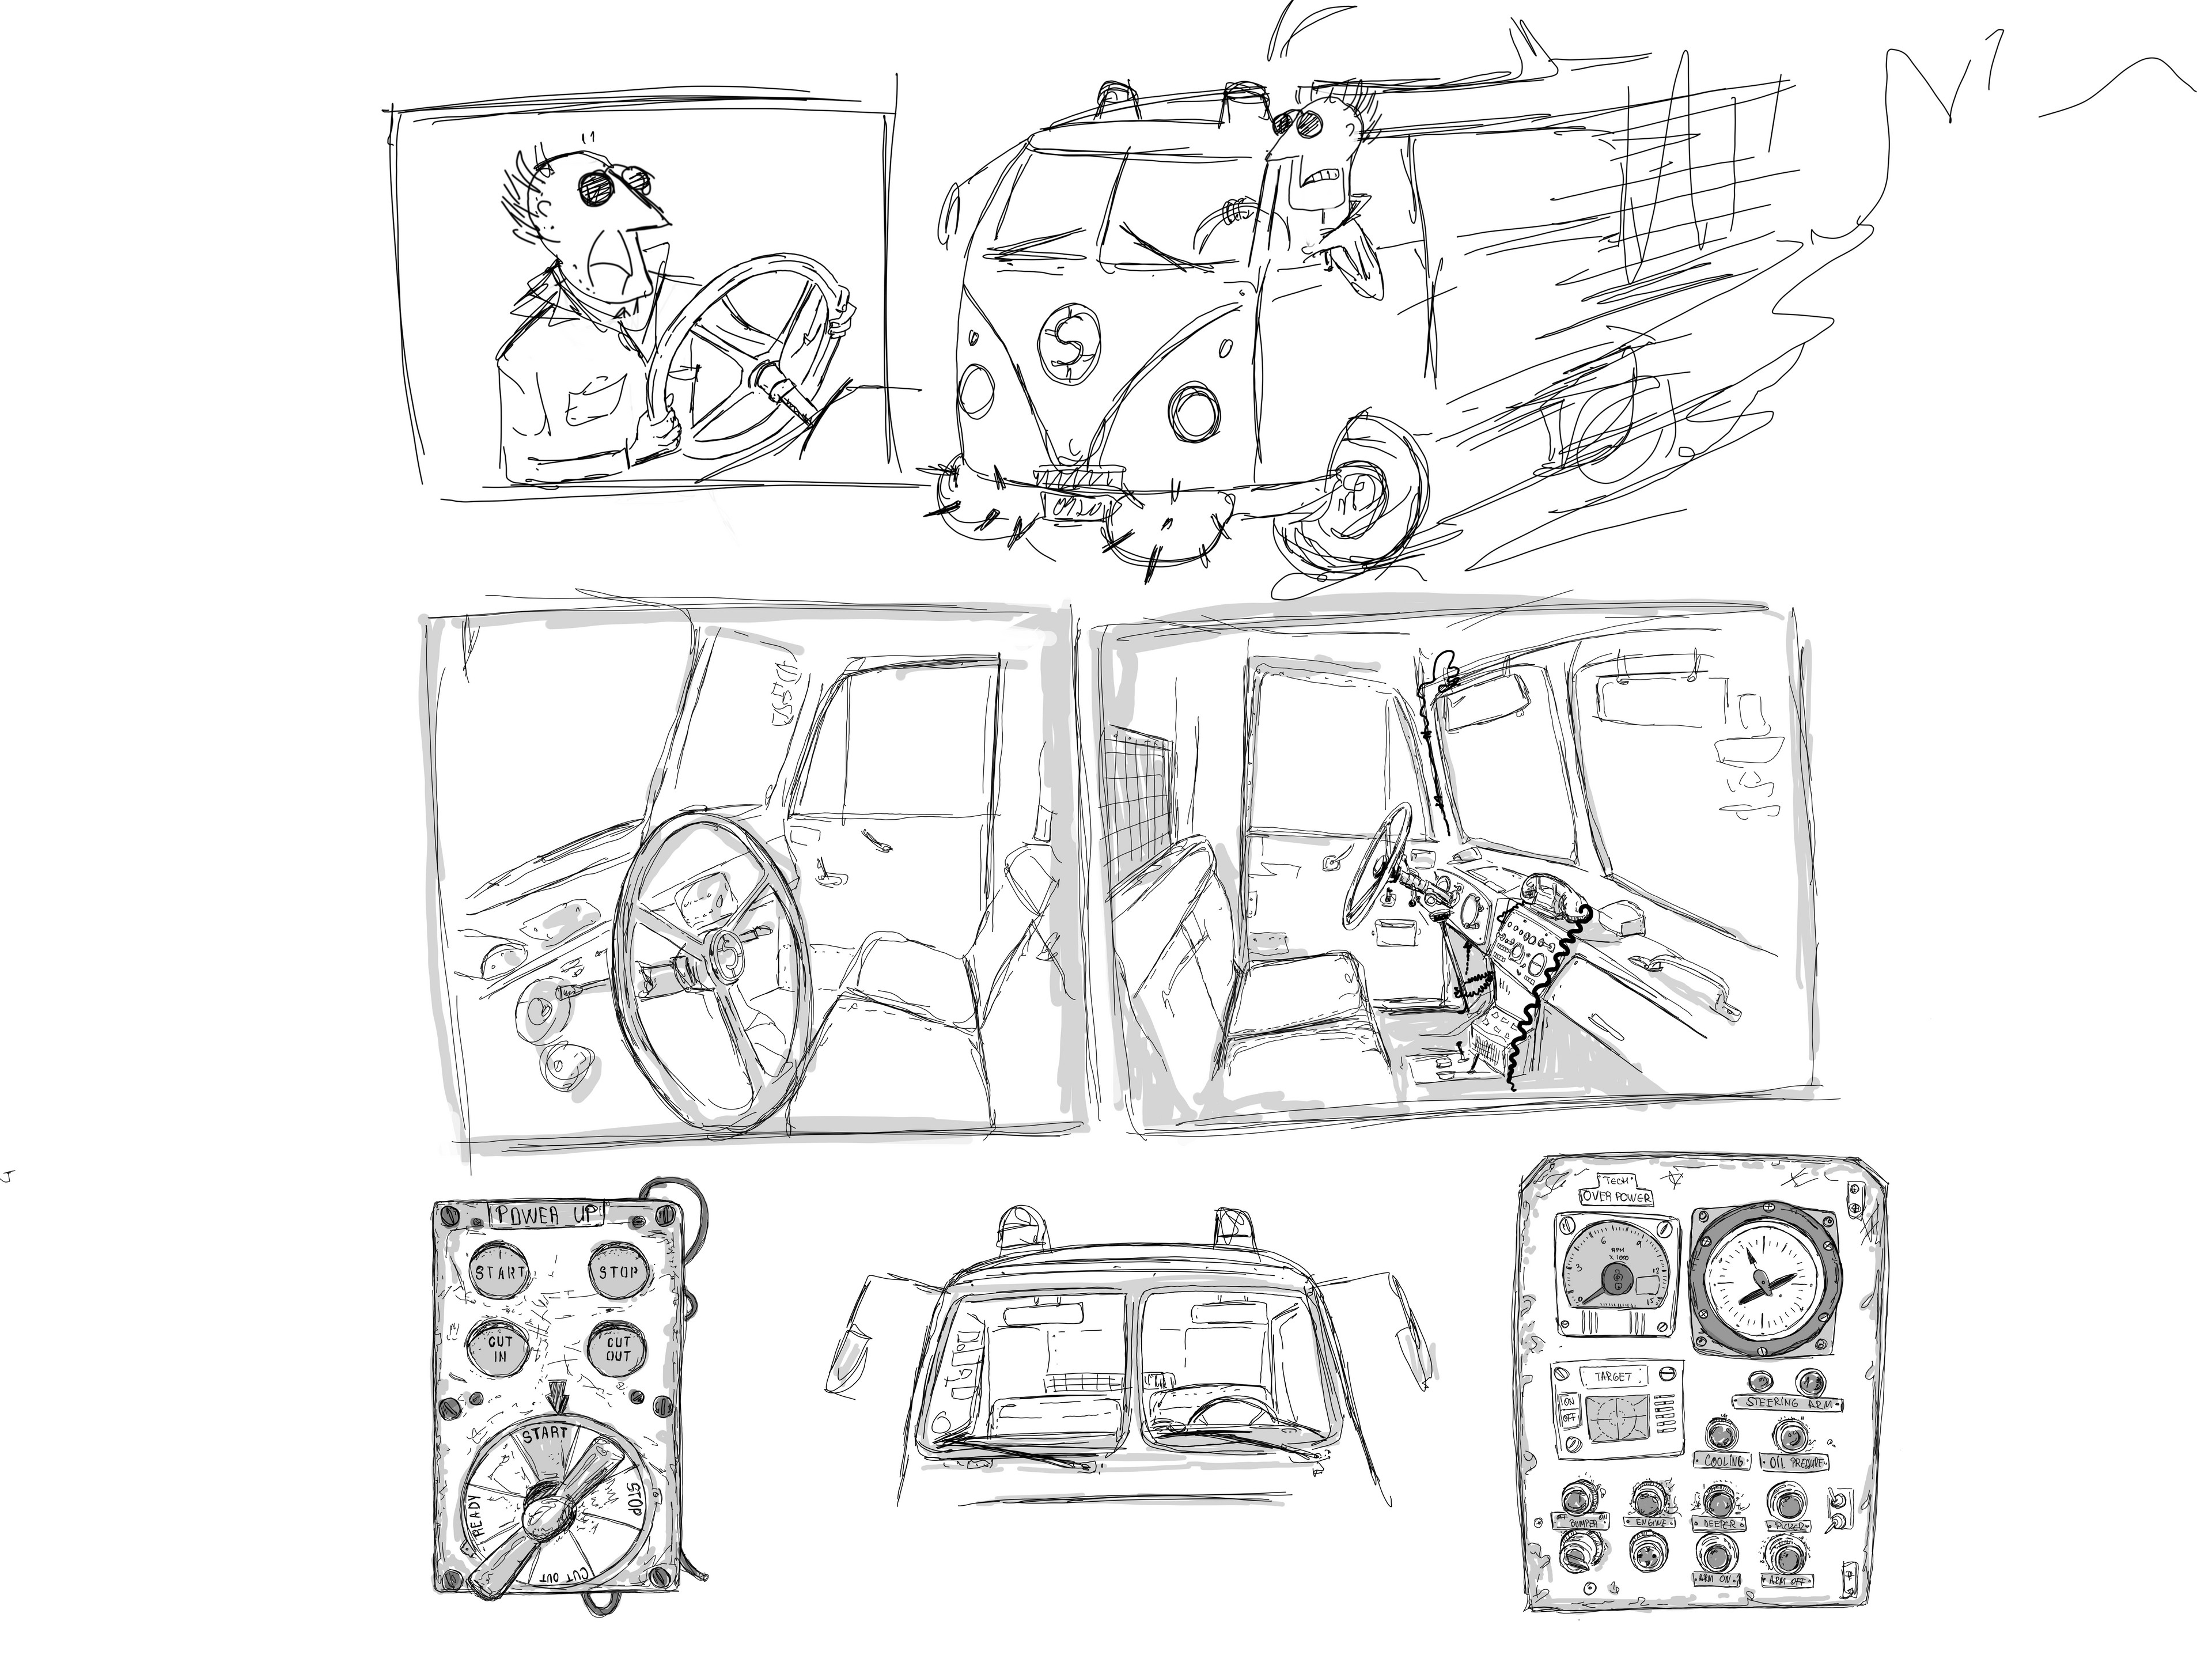 Exploration of the vehicle interior